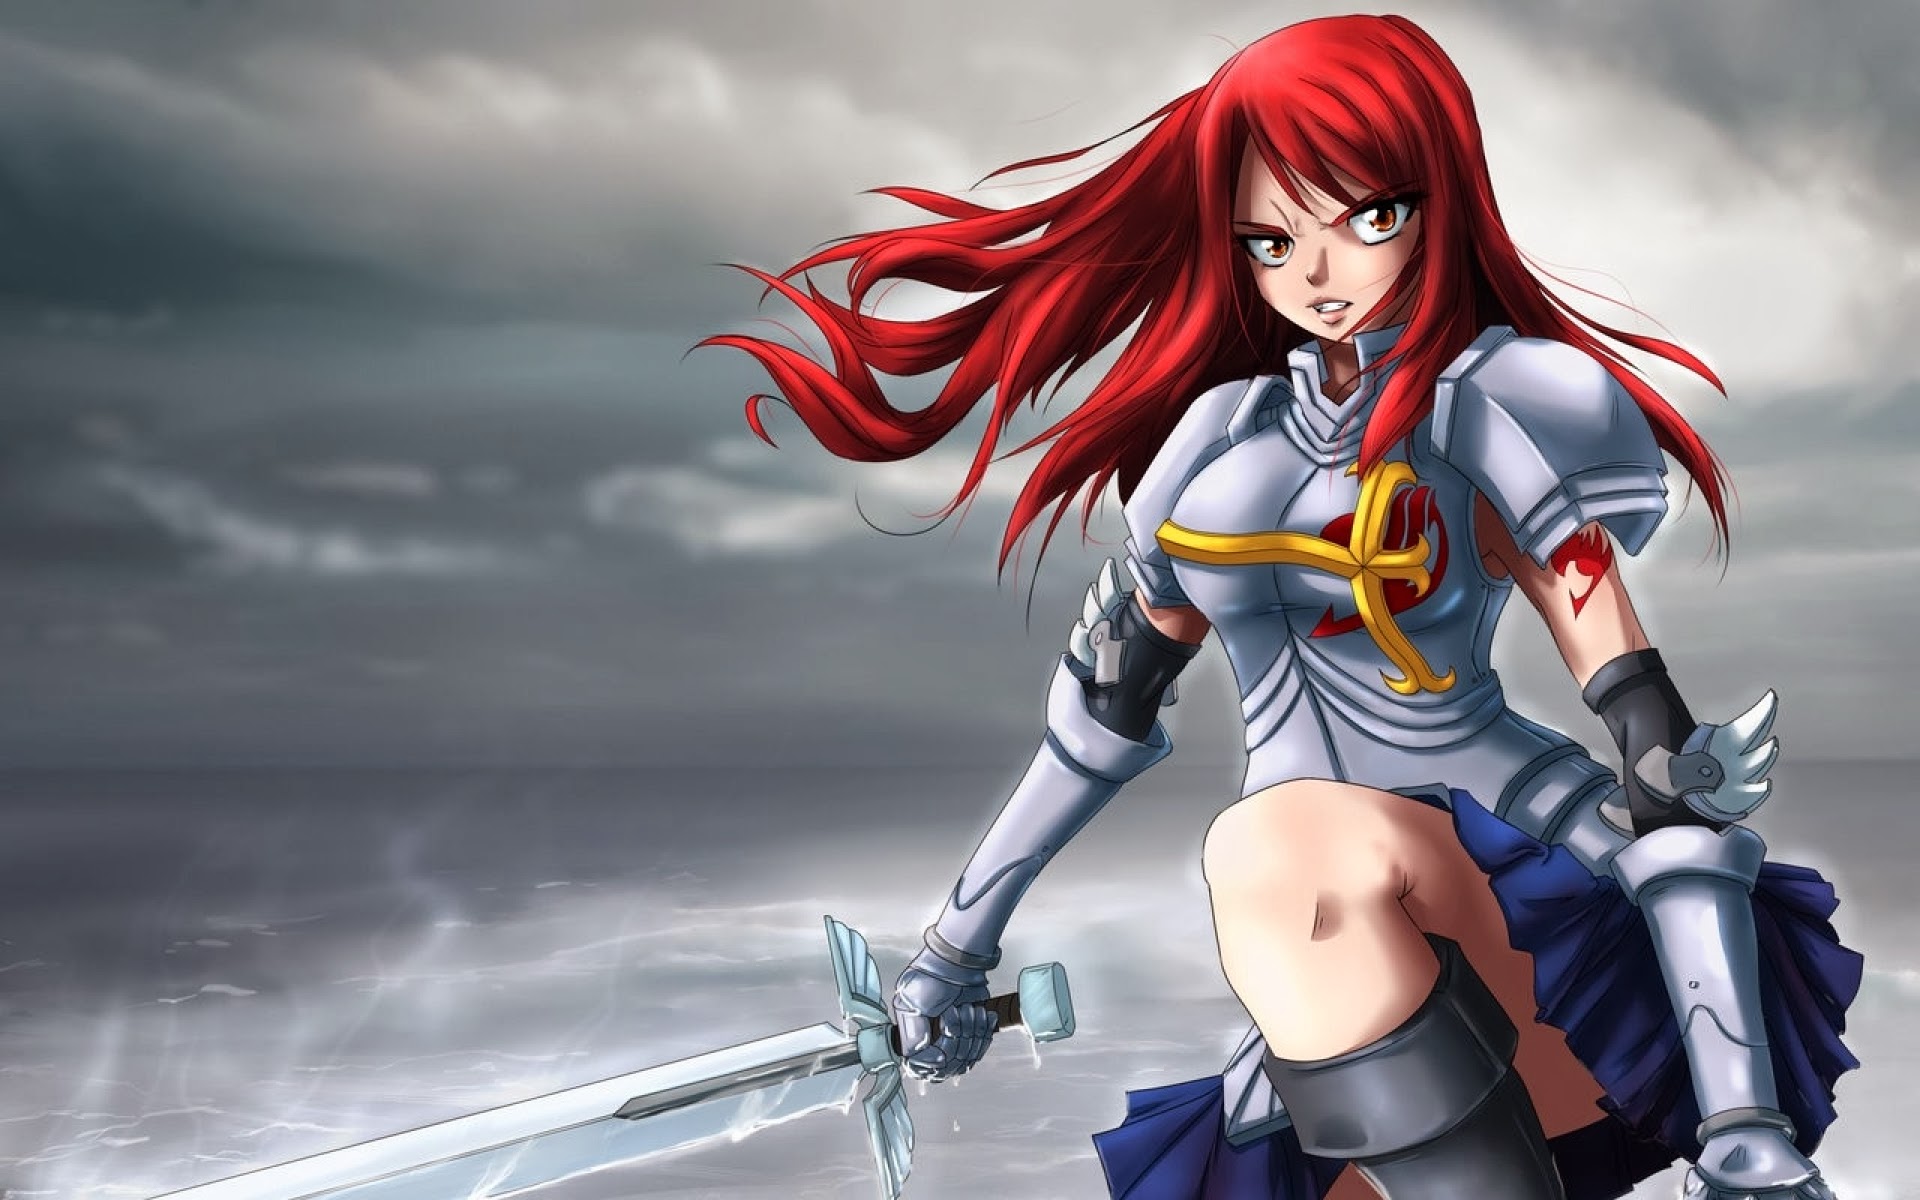 Hd Erza Scarlet Armor Free HD Wallpapers   ImgHD Browse and